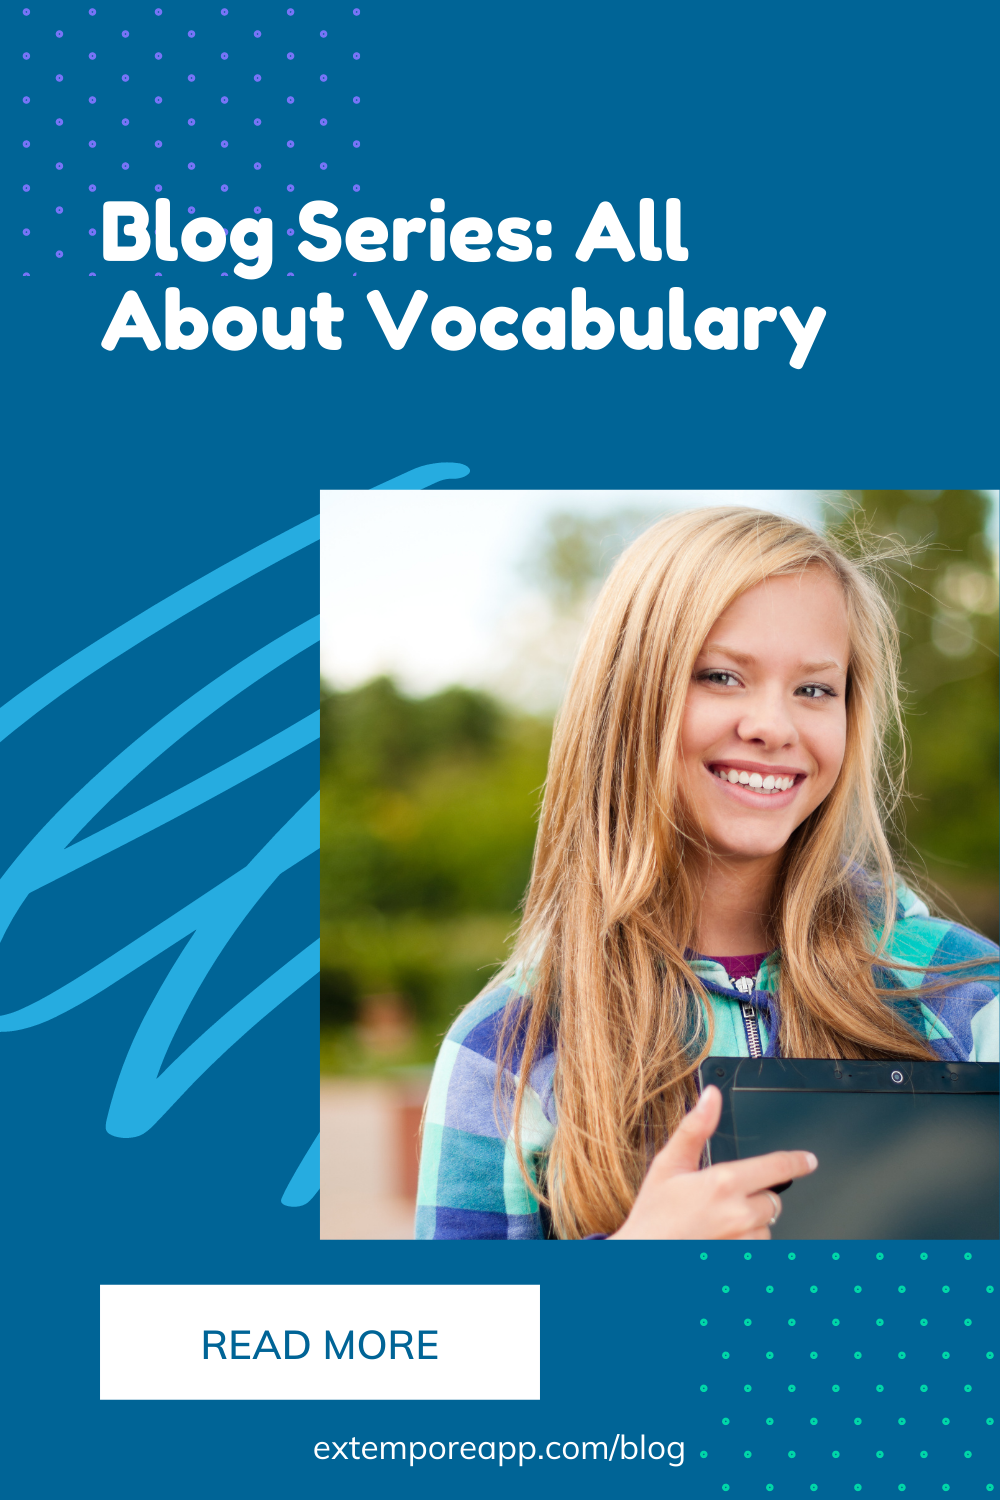 Blog Series: All About Vocabulary